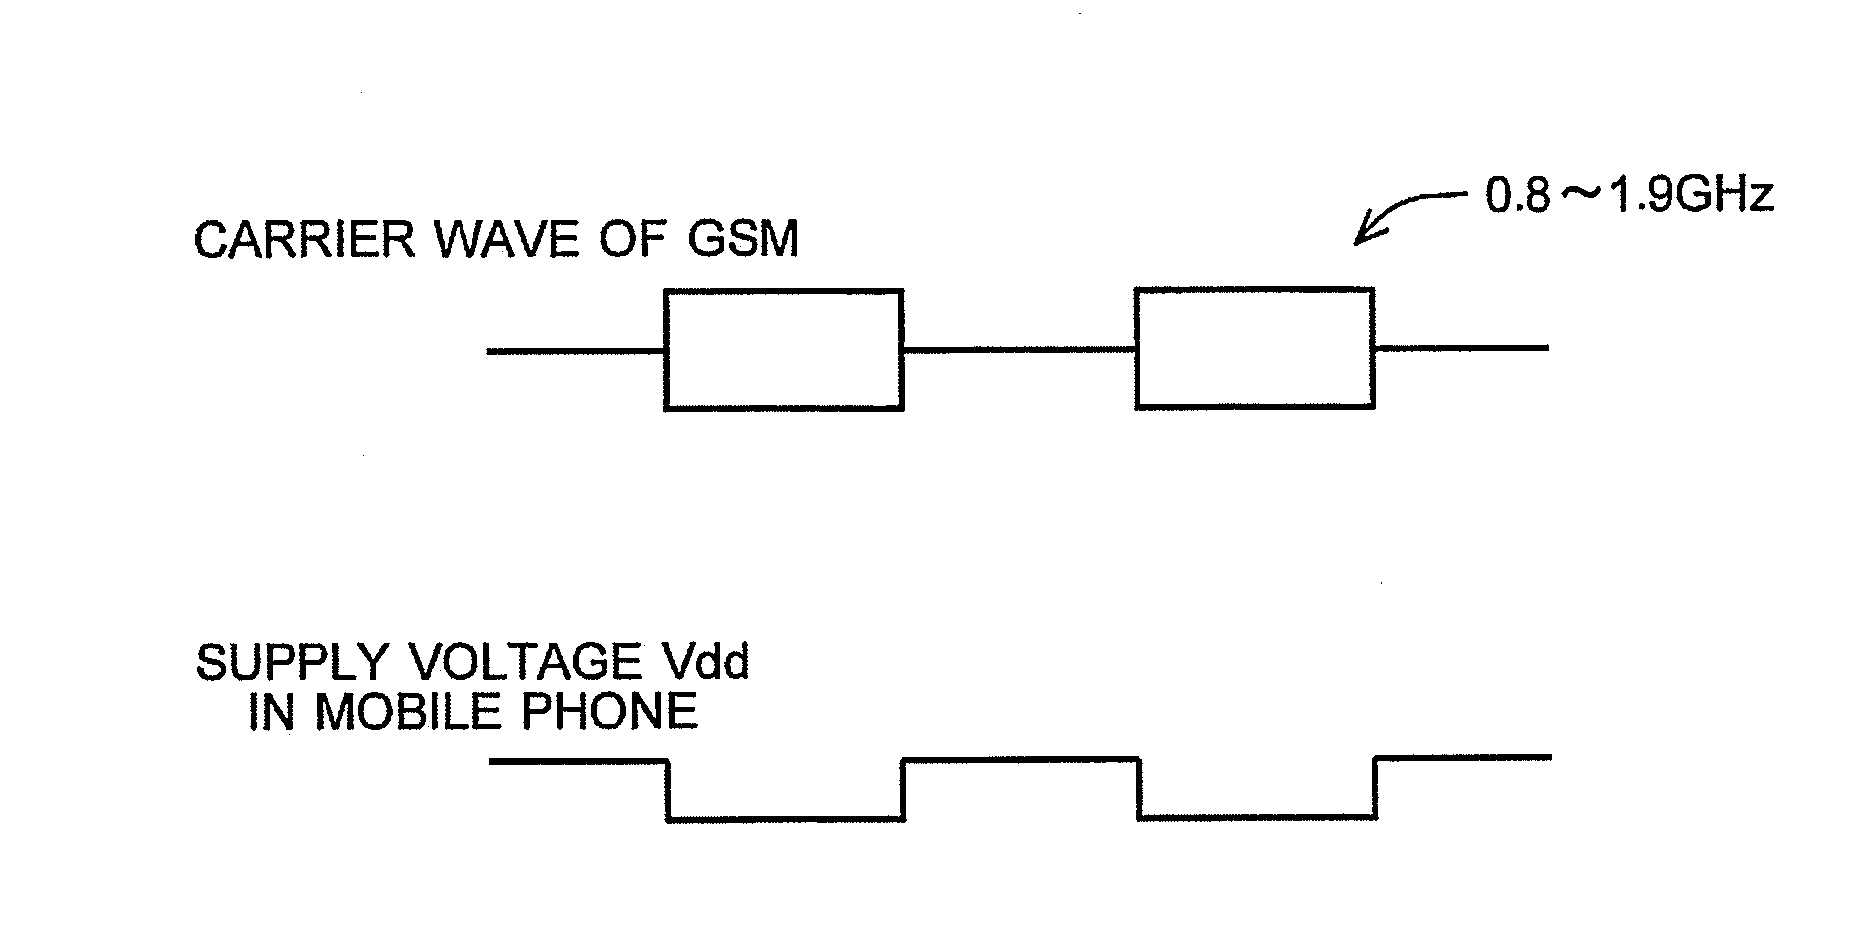 Amplifier circuit of capacitor microphone